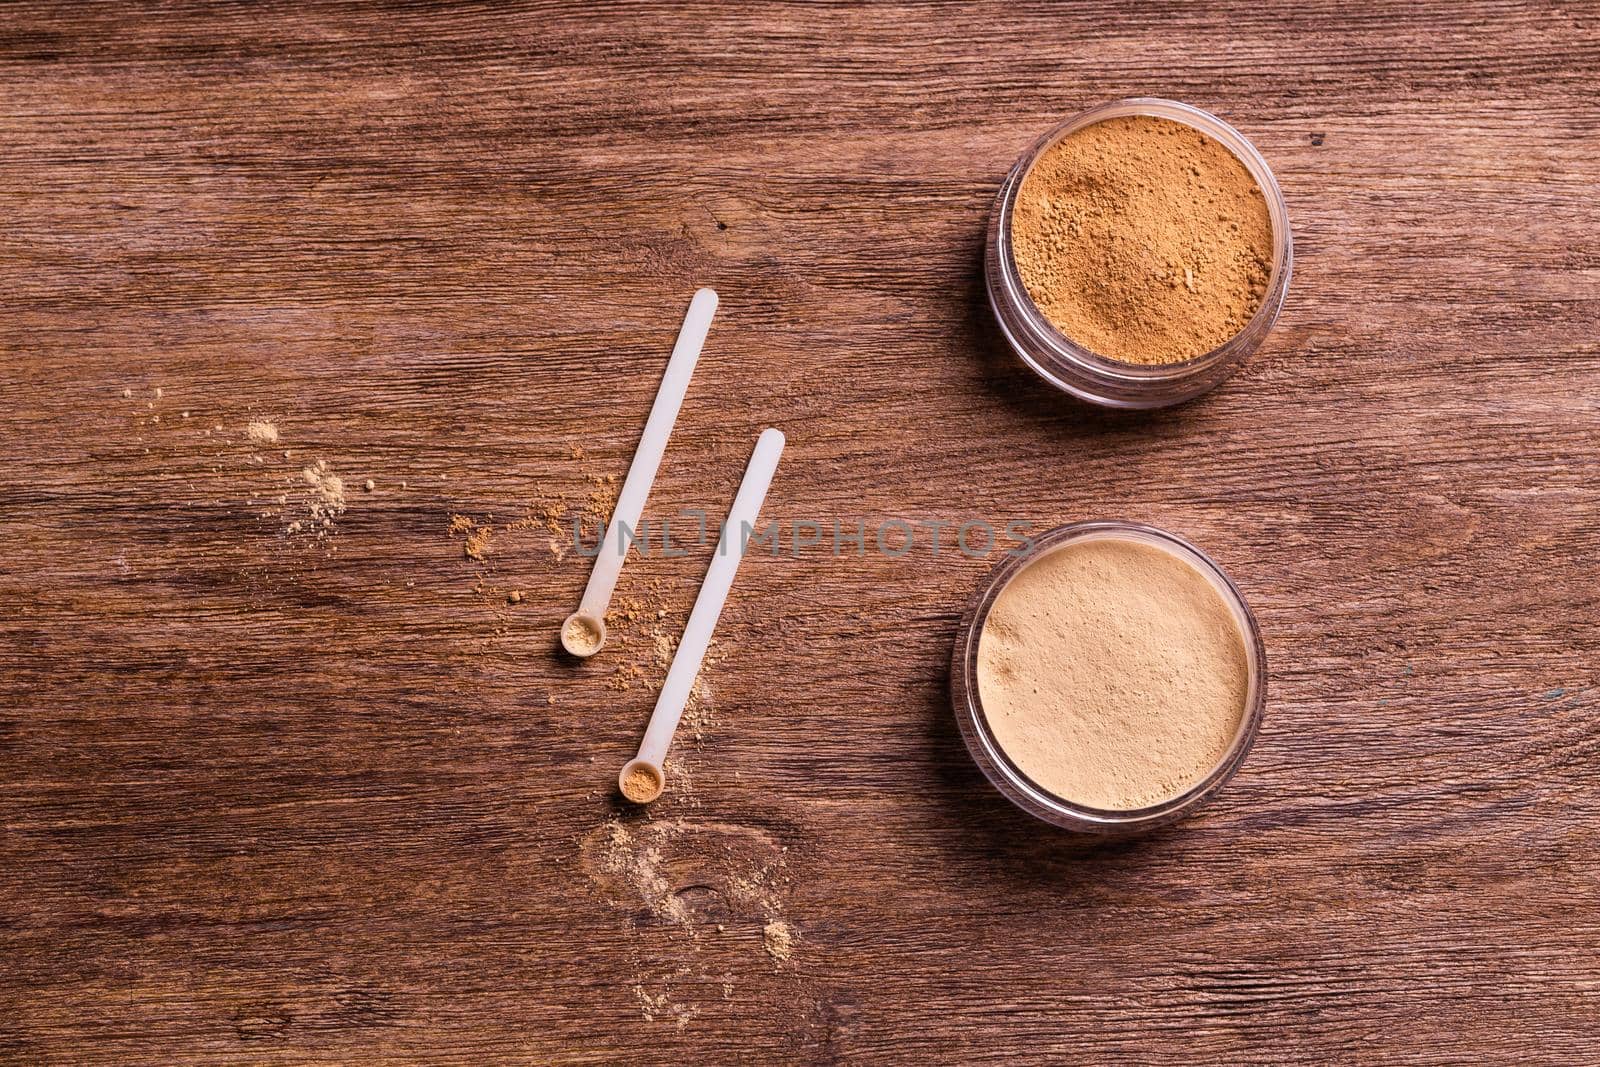 Mineral powder of different colors with spoon dispenser for make-up on wooden background.